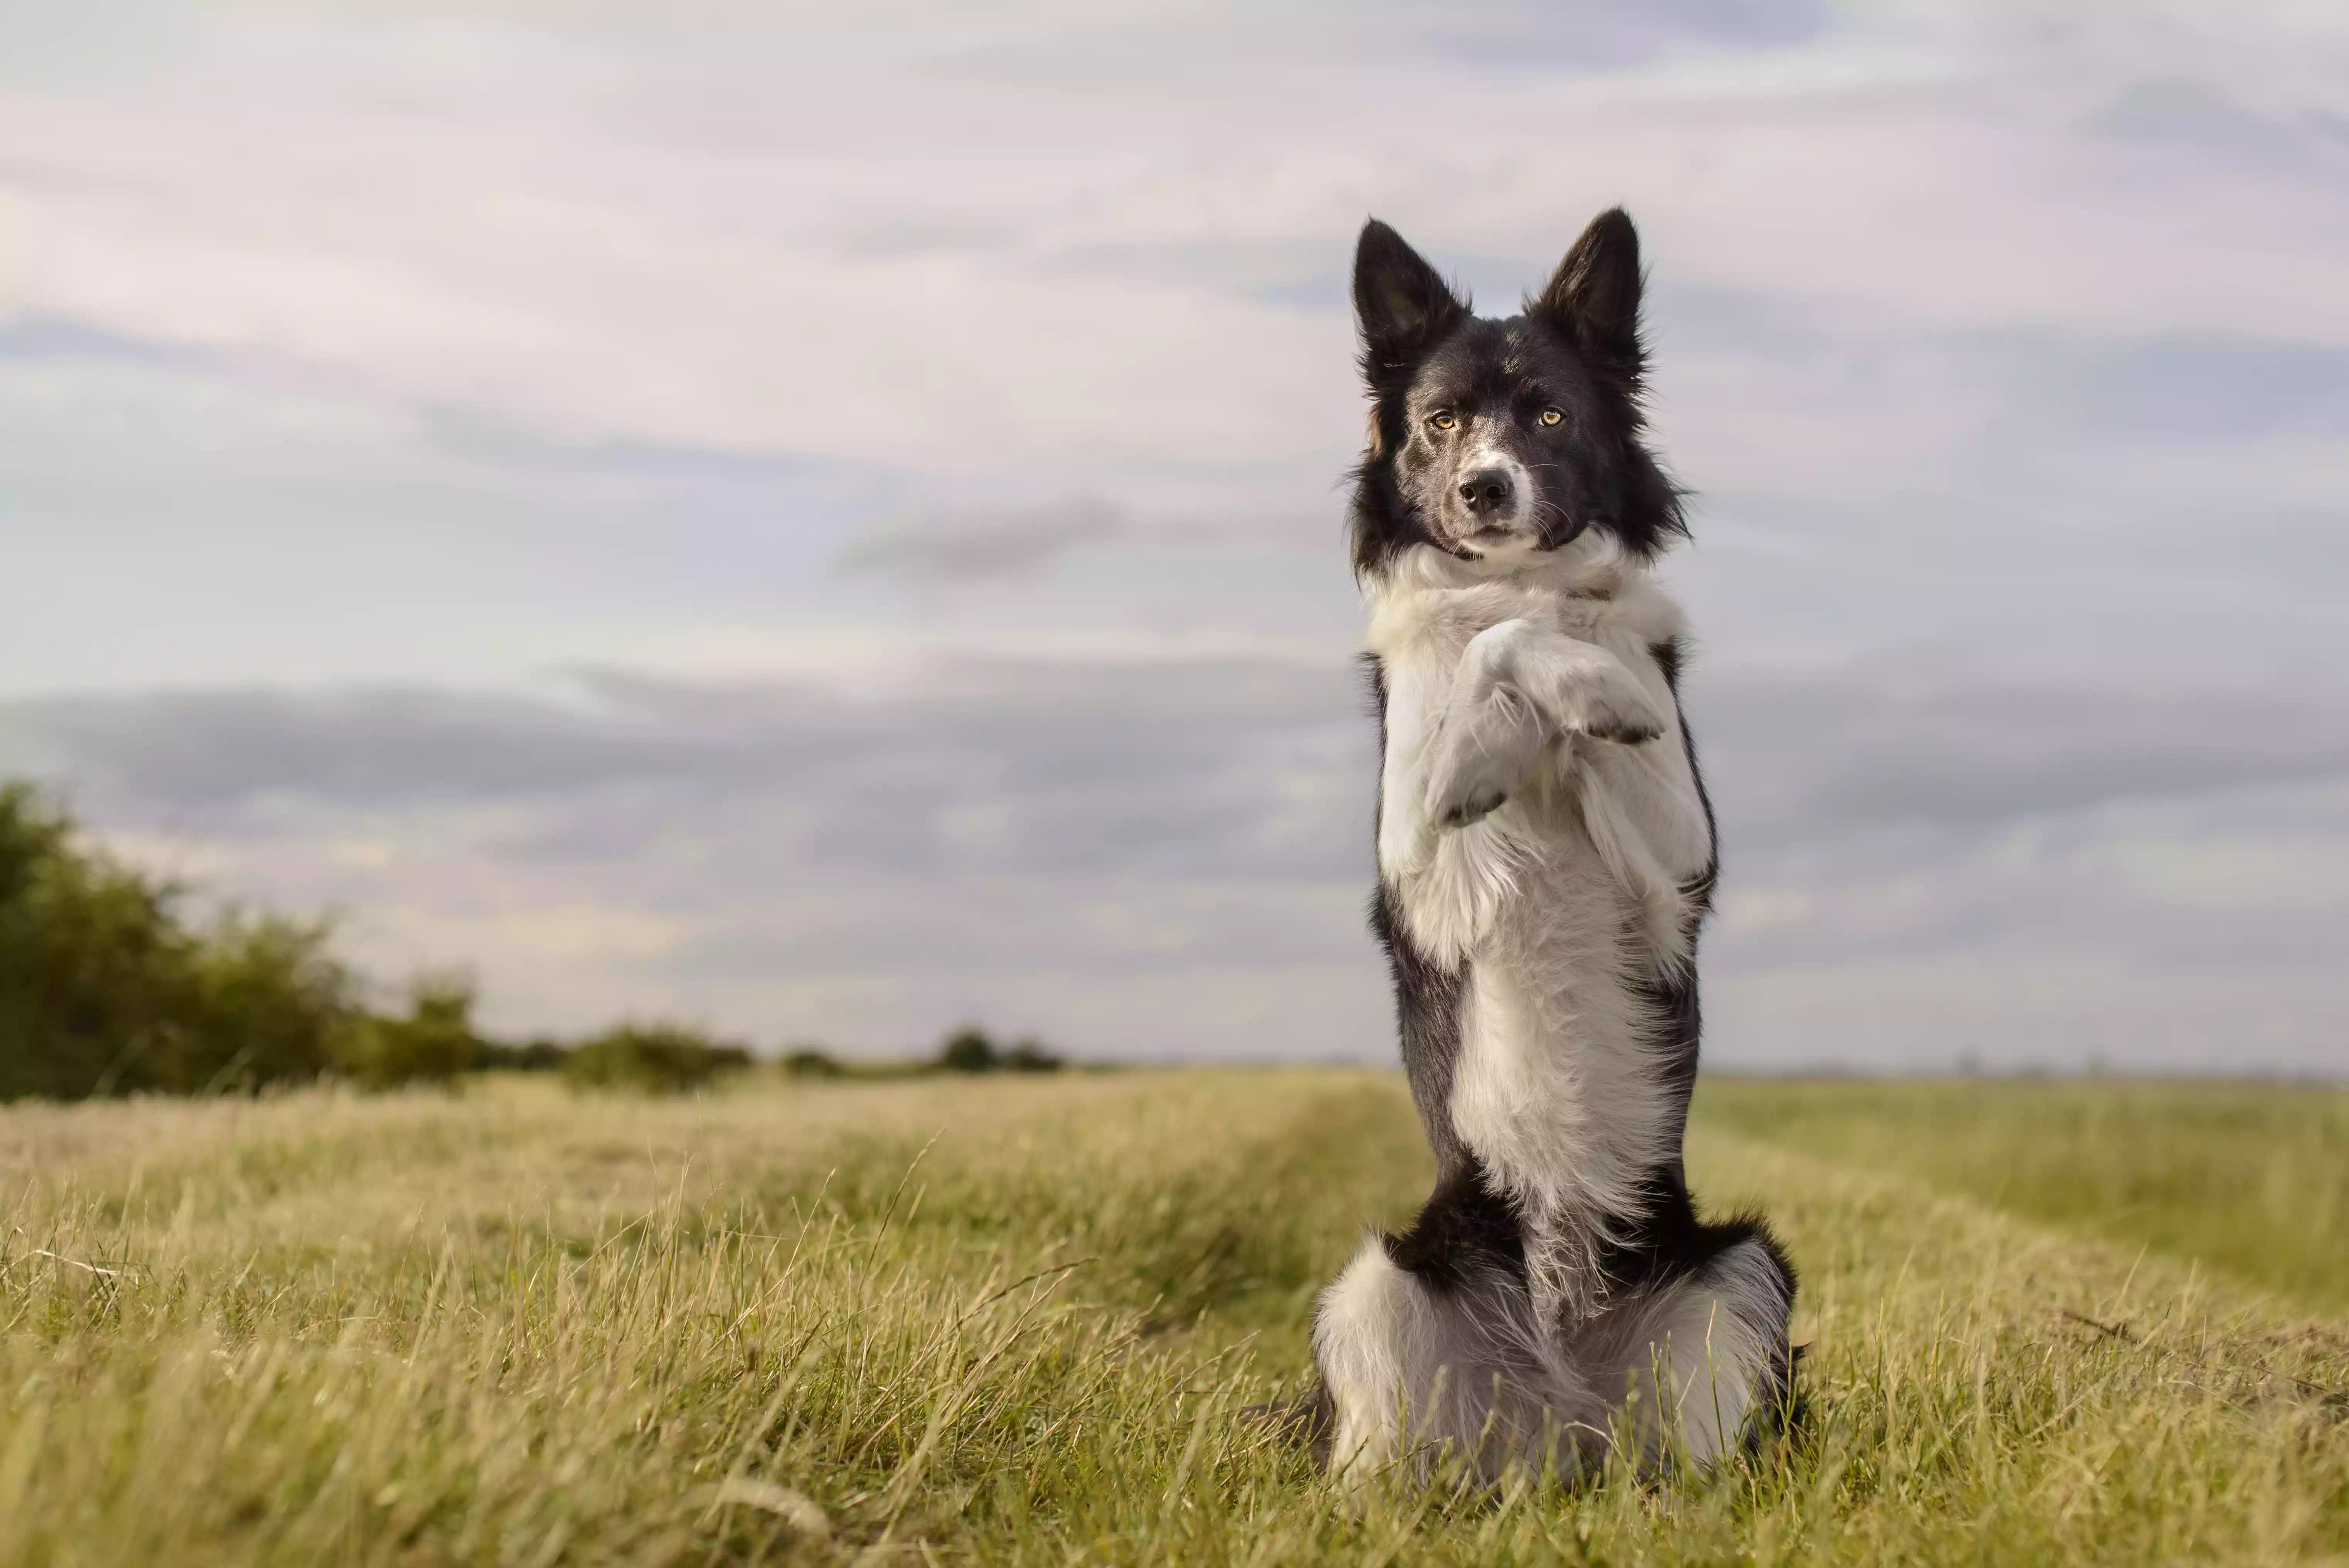 black and white dog in a field doing trick standing on two paws